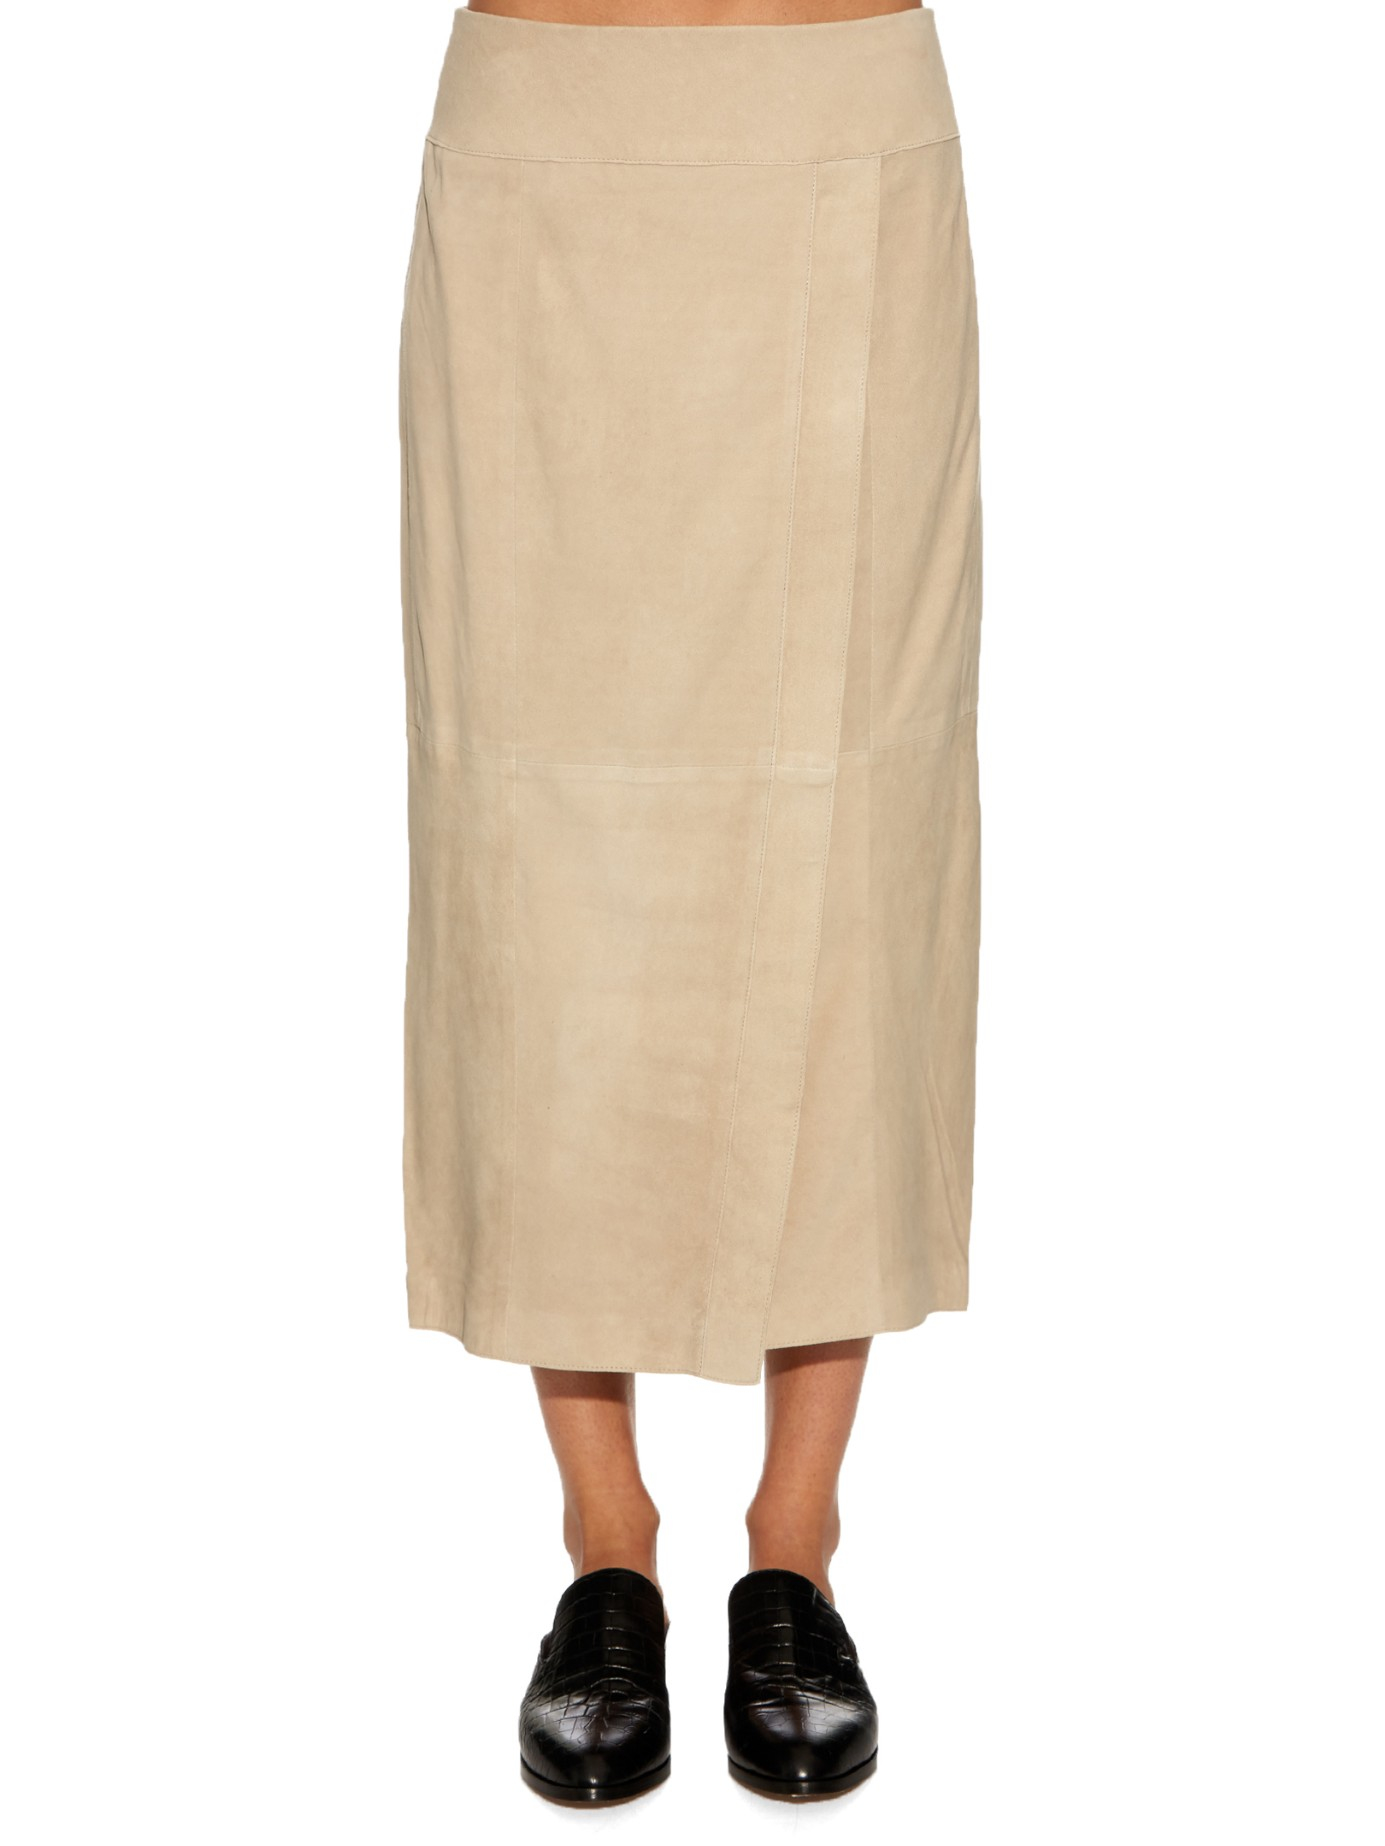 Vince Wrap-over Suede Midi Skirt in Beige (Natural) - Lyst